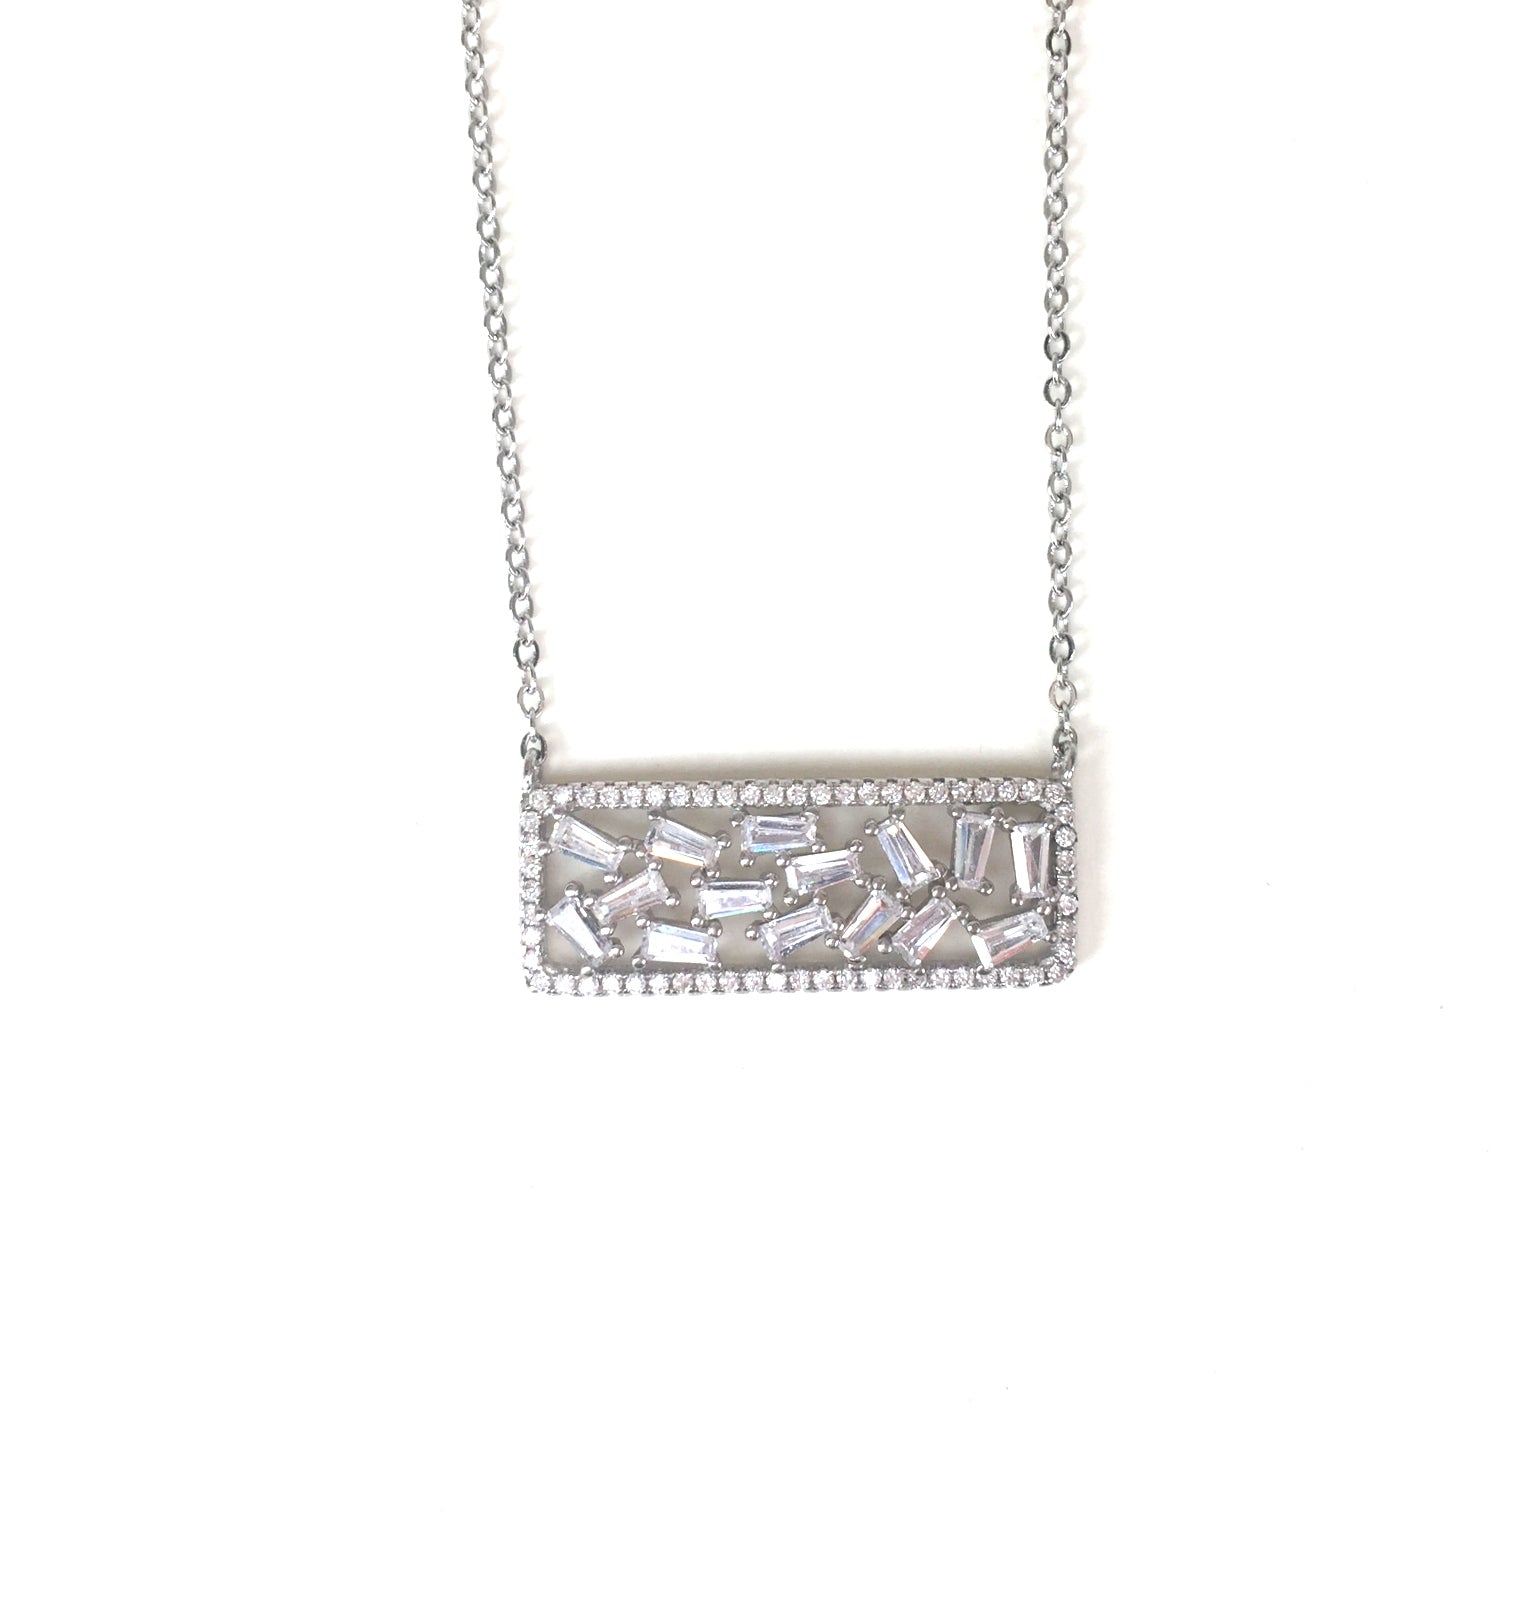 SPARKLING HORIZONTAL DECORATED BAR PAVE CZ STERLING SILVER NECKLACE